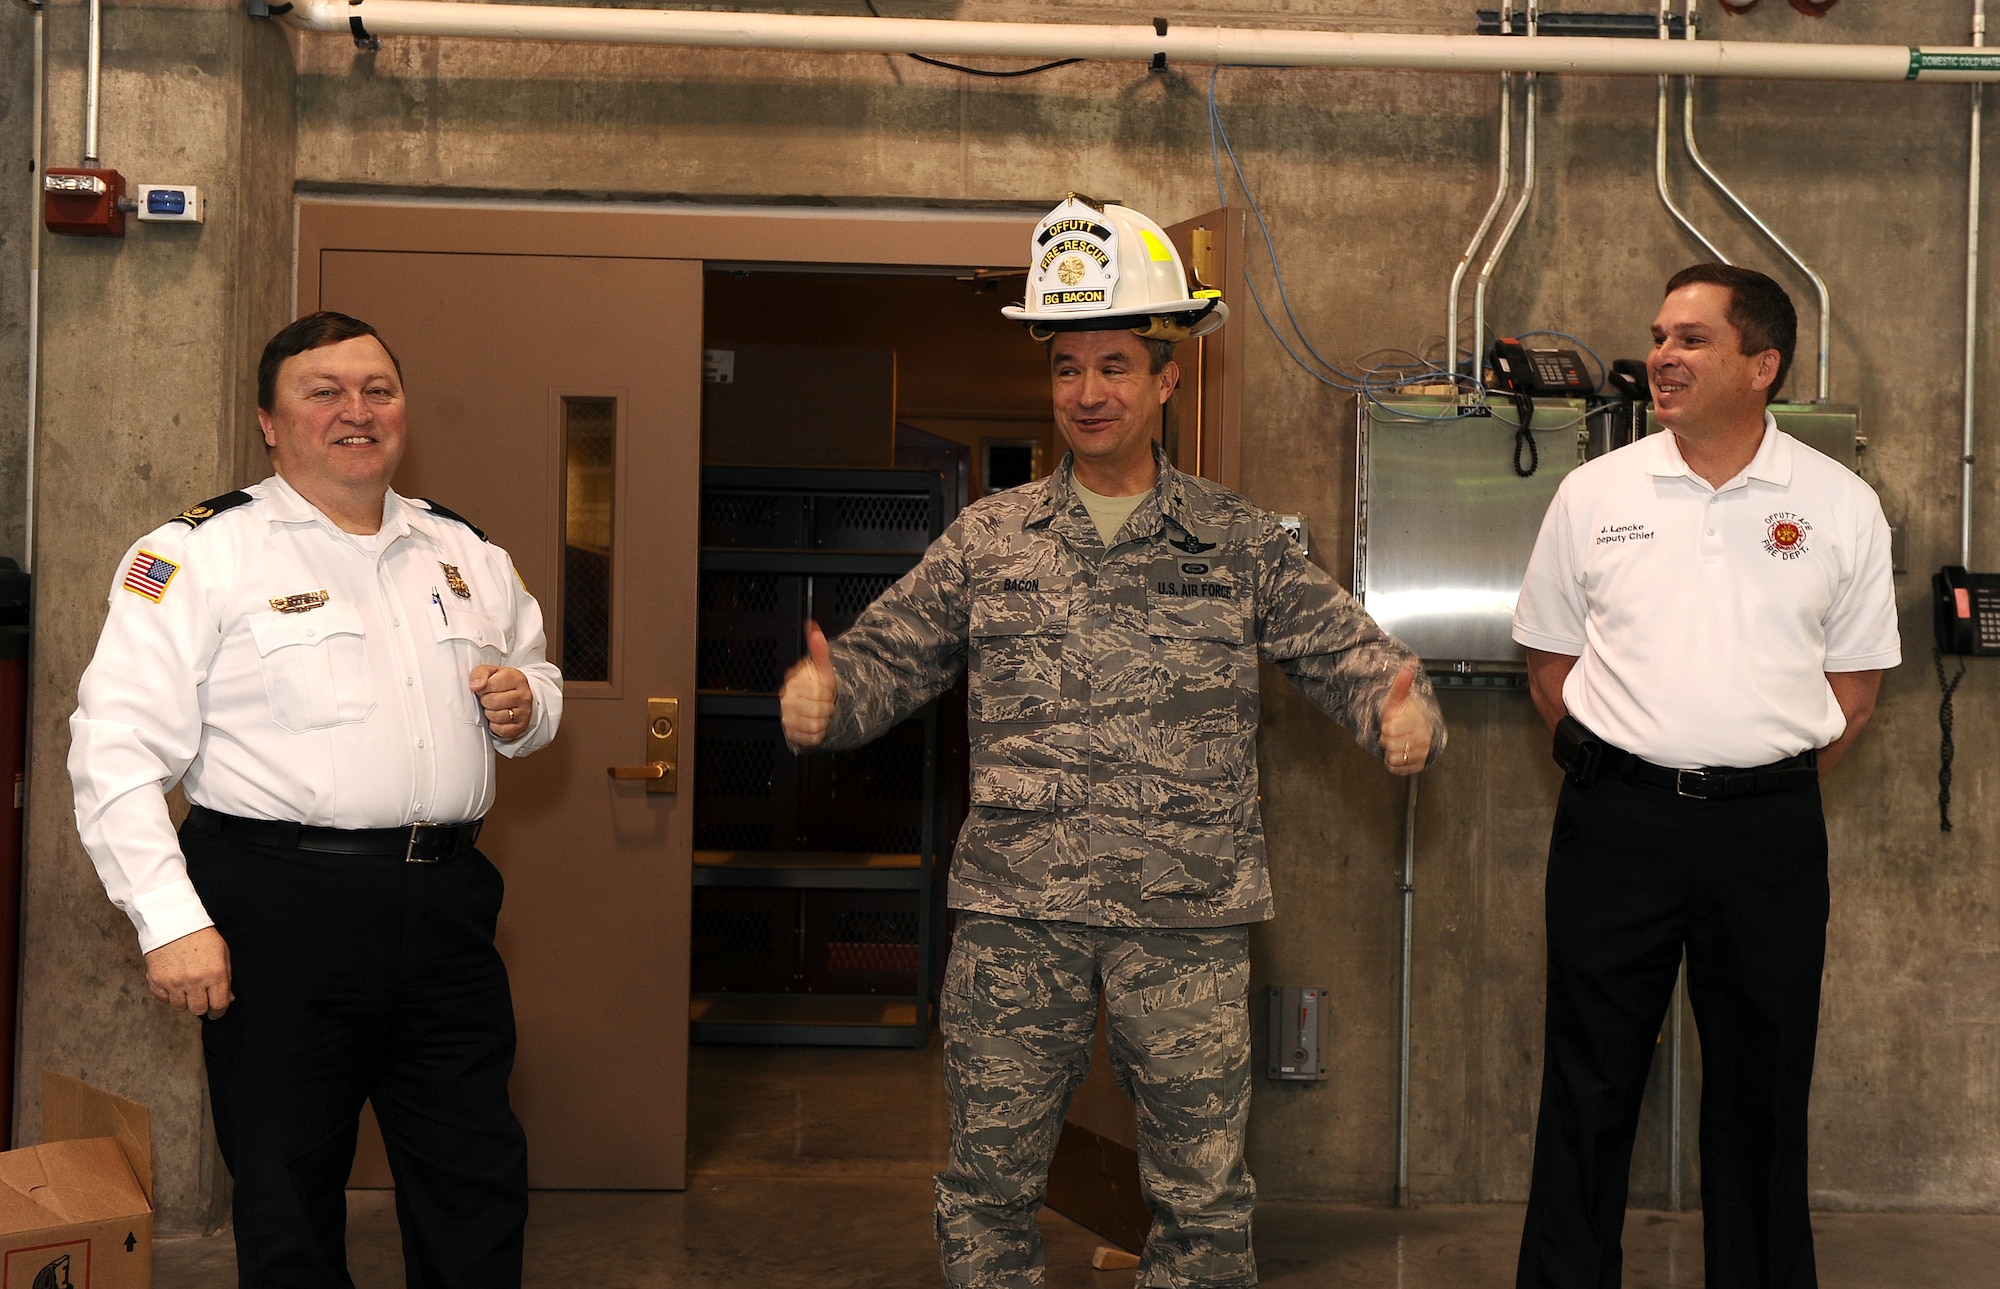 U.S. Air Force Brig Gen. Donald Bacon, 55th Wing commander, gives two thumbs up after receiving his honorary fireman's hat during morning roll call at the firehouse on Offutt Air Force Base, Neb., March 8.  Offutt Fire Chief David Eblin (left) and deputy fire chief James Lencke (right) honored the wing commander with a gift following his 24-hour shift he spent with Offutt's fire fighters.  (U.S. Air Force photo by Josh Plueger/Released).